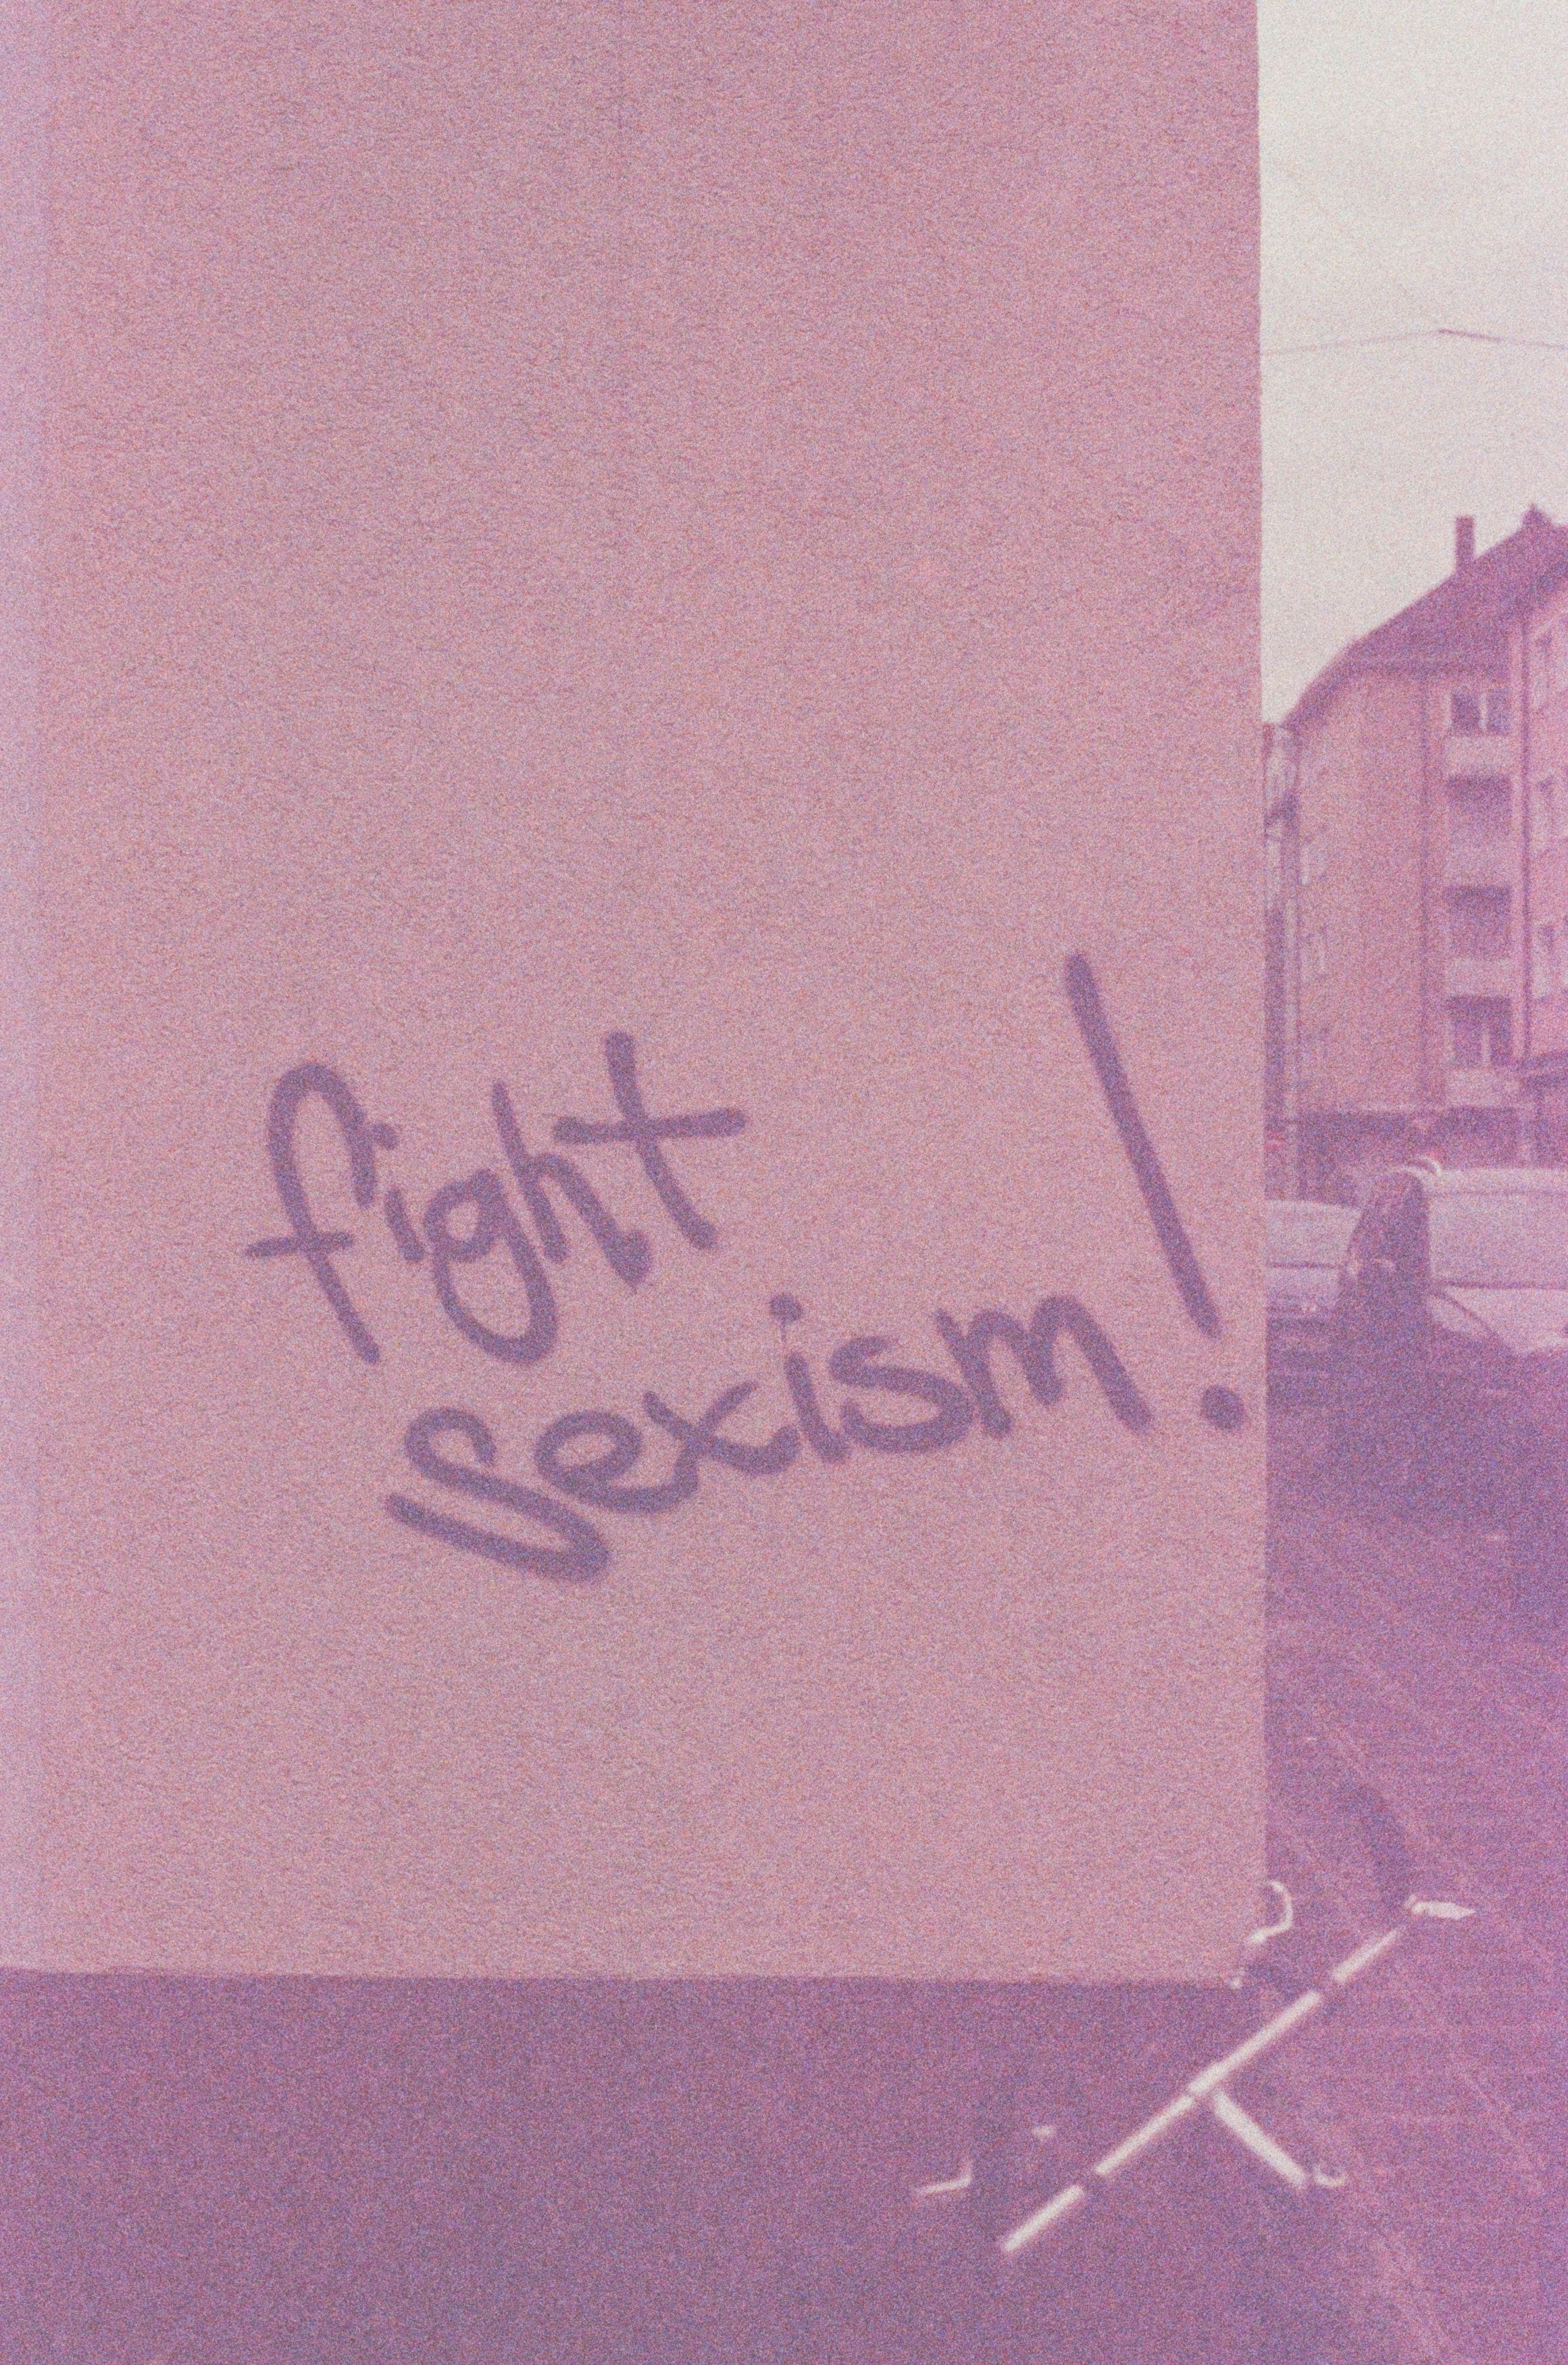 fight-sexism-wall-tag-street-art-the-everyday-sexism-project